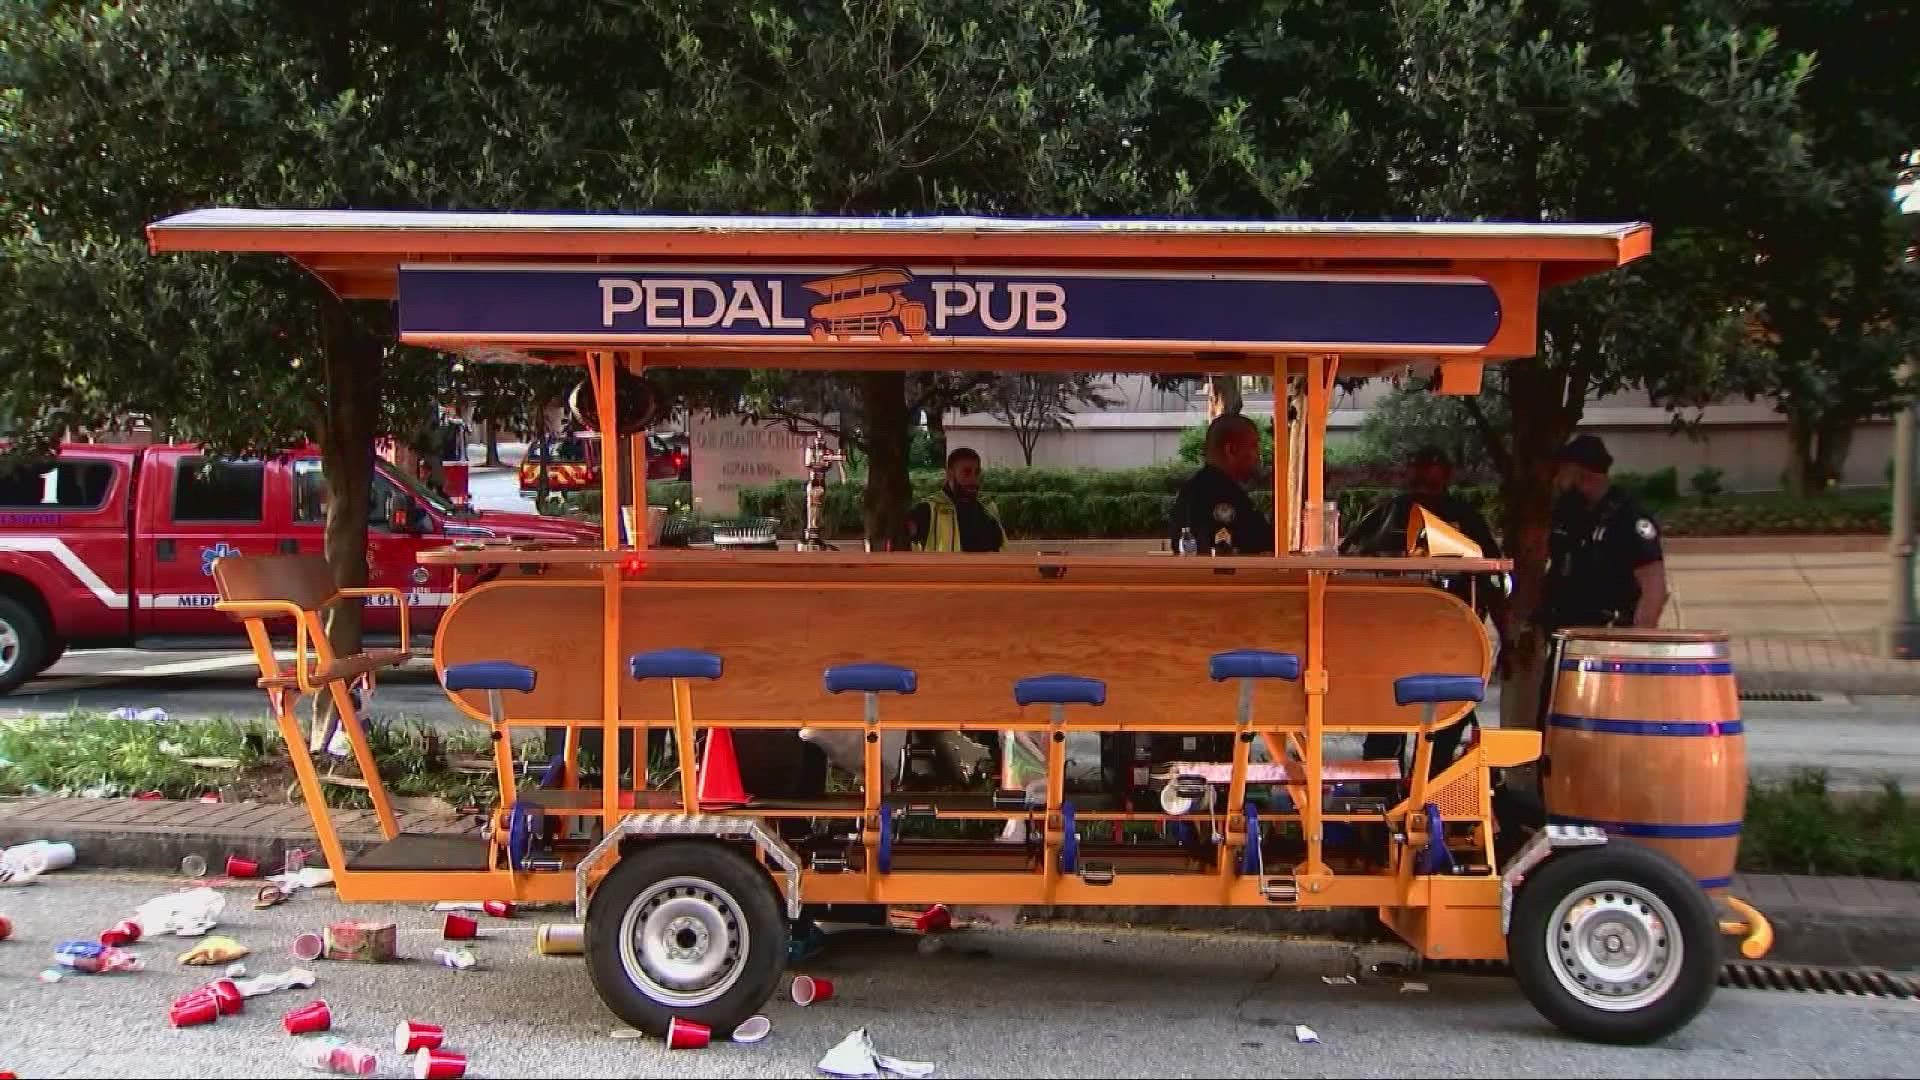 The driver of a "pedal pub" was arrested and charged with DUI after an Atlanta crash. And, Amber Heard to take the stand in Johnny Depp's defamation trial.